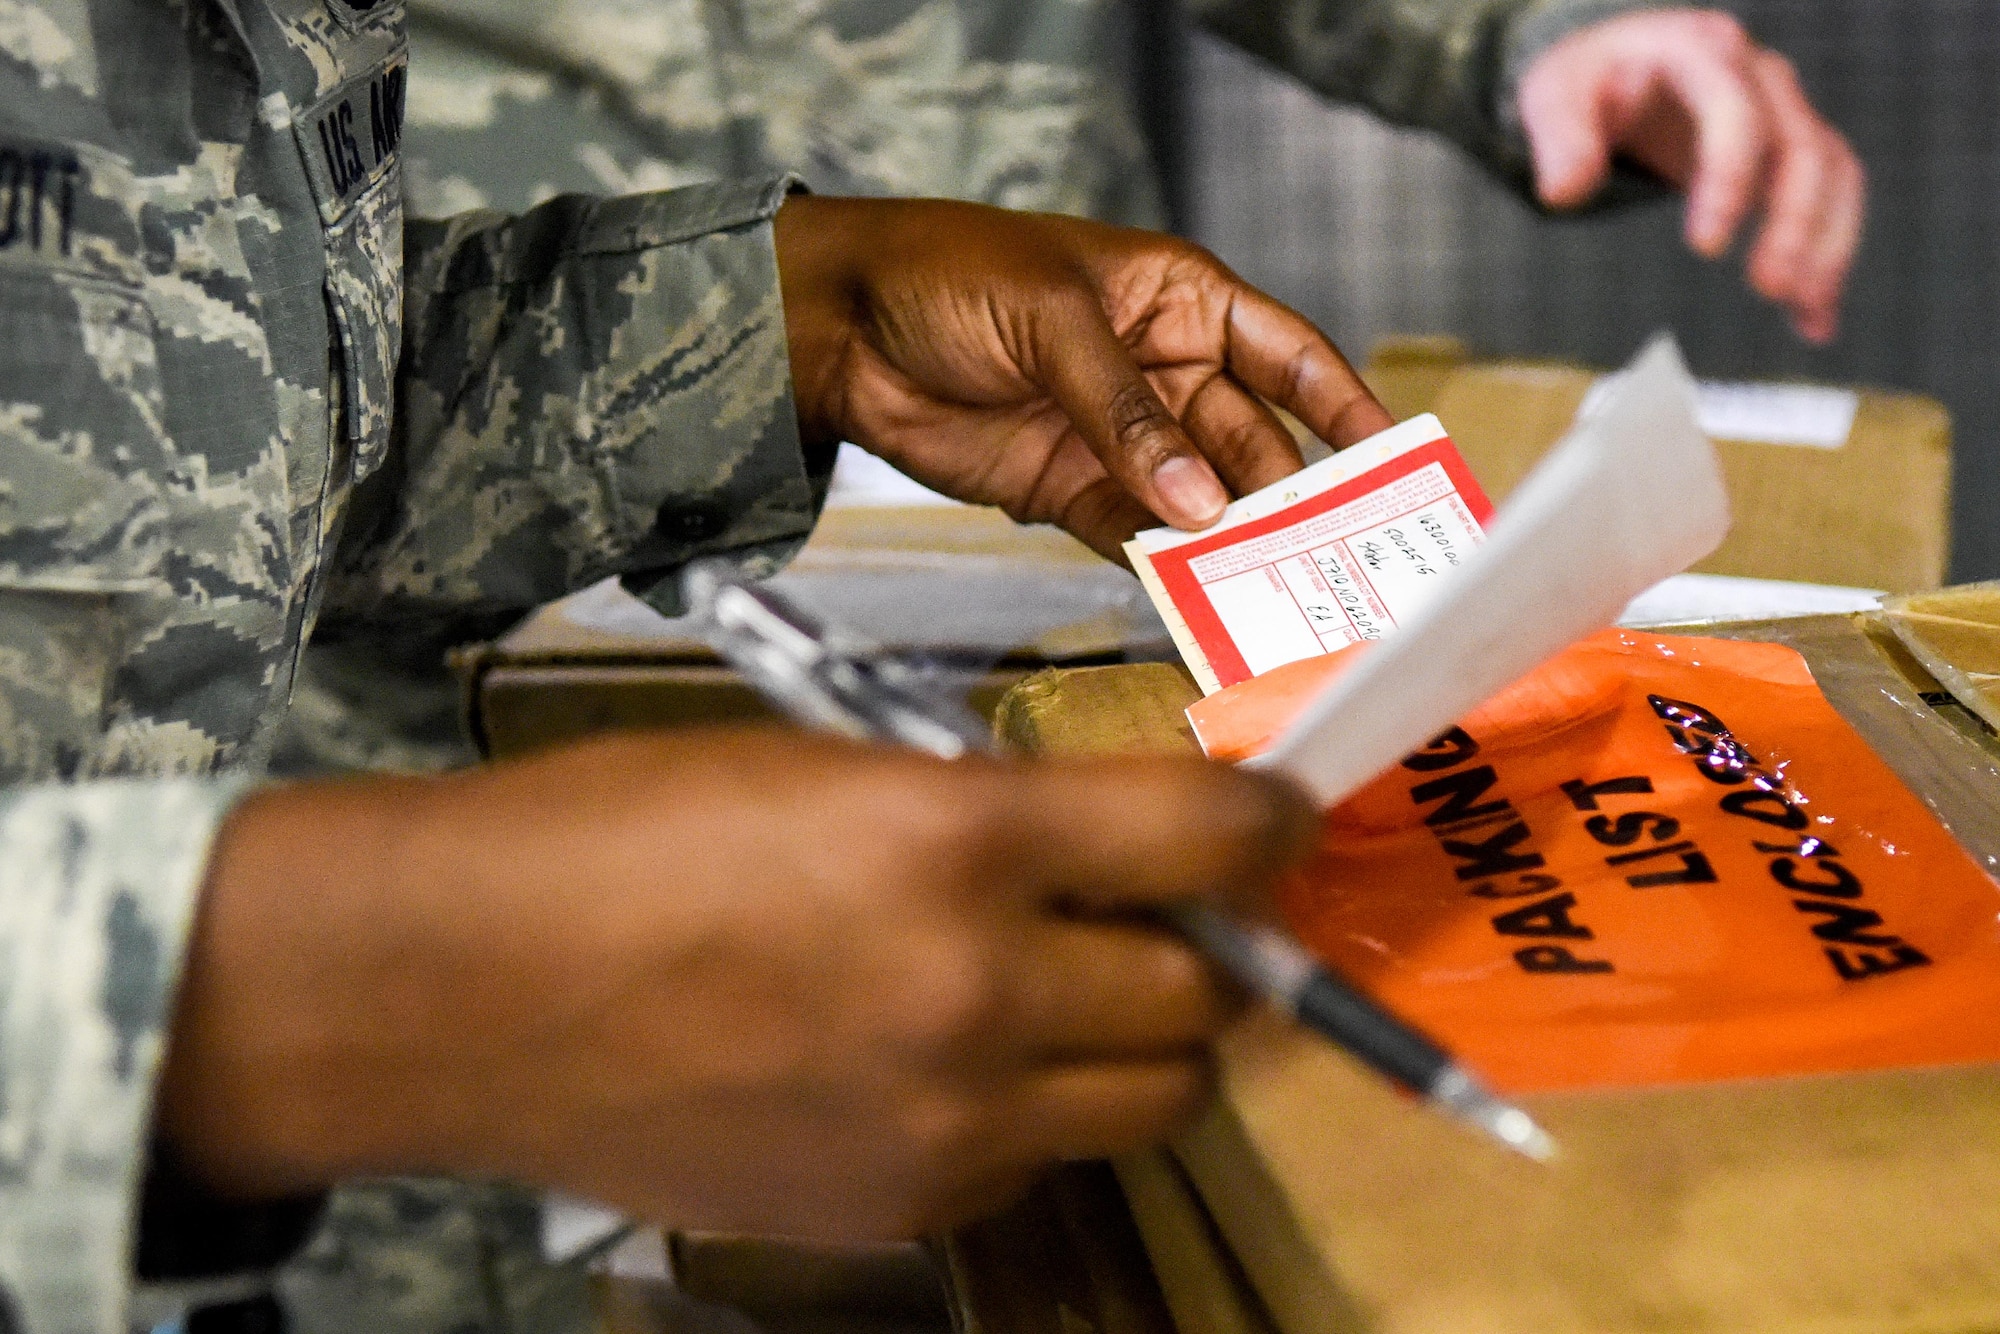 Tech. Sgt. Jewel Stott, 4th LRS NCO in-charge of Centralized Repair Facility, checks in maintenance parts from the 4th Component Maintenance Squadron back shop into the CRF, Aug. 3, 2016, at Seymour Johnson Air Force Base, North Carolina. After parts are checked-in they are entered into the Execution and Prioritization of Repair Support System which is a computer database that allows other installations to search for parts. (U.S. Air Force photo by Airman Shawna L. Keyes)